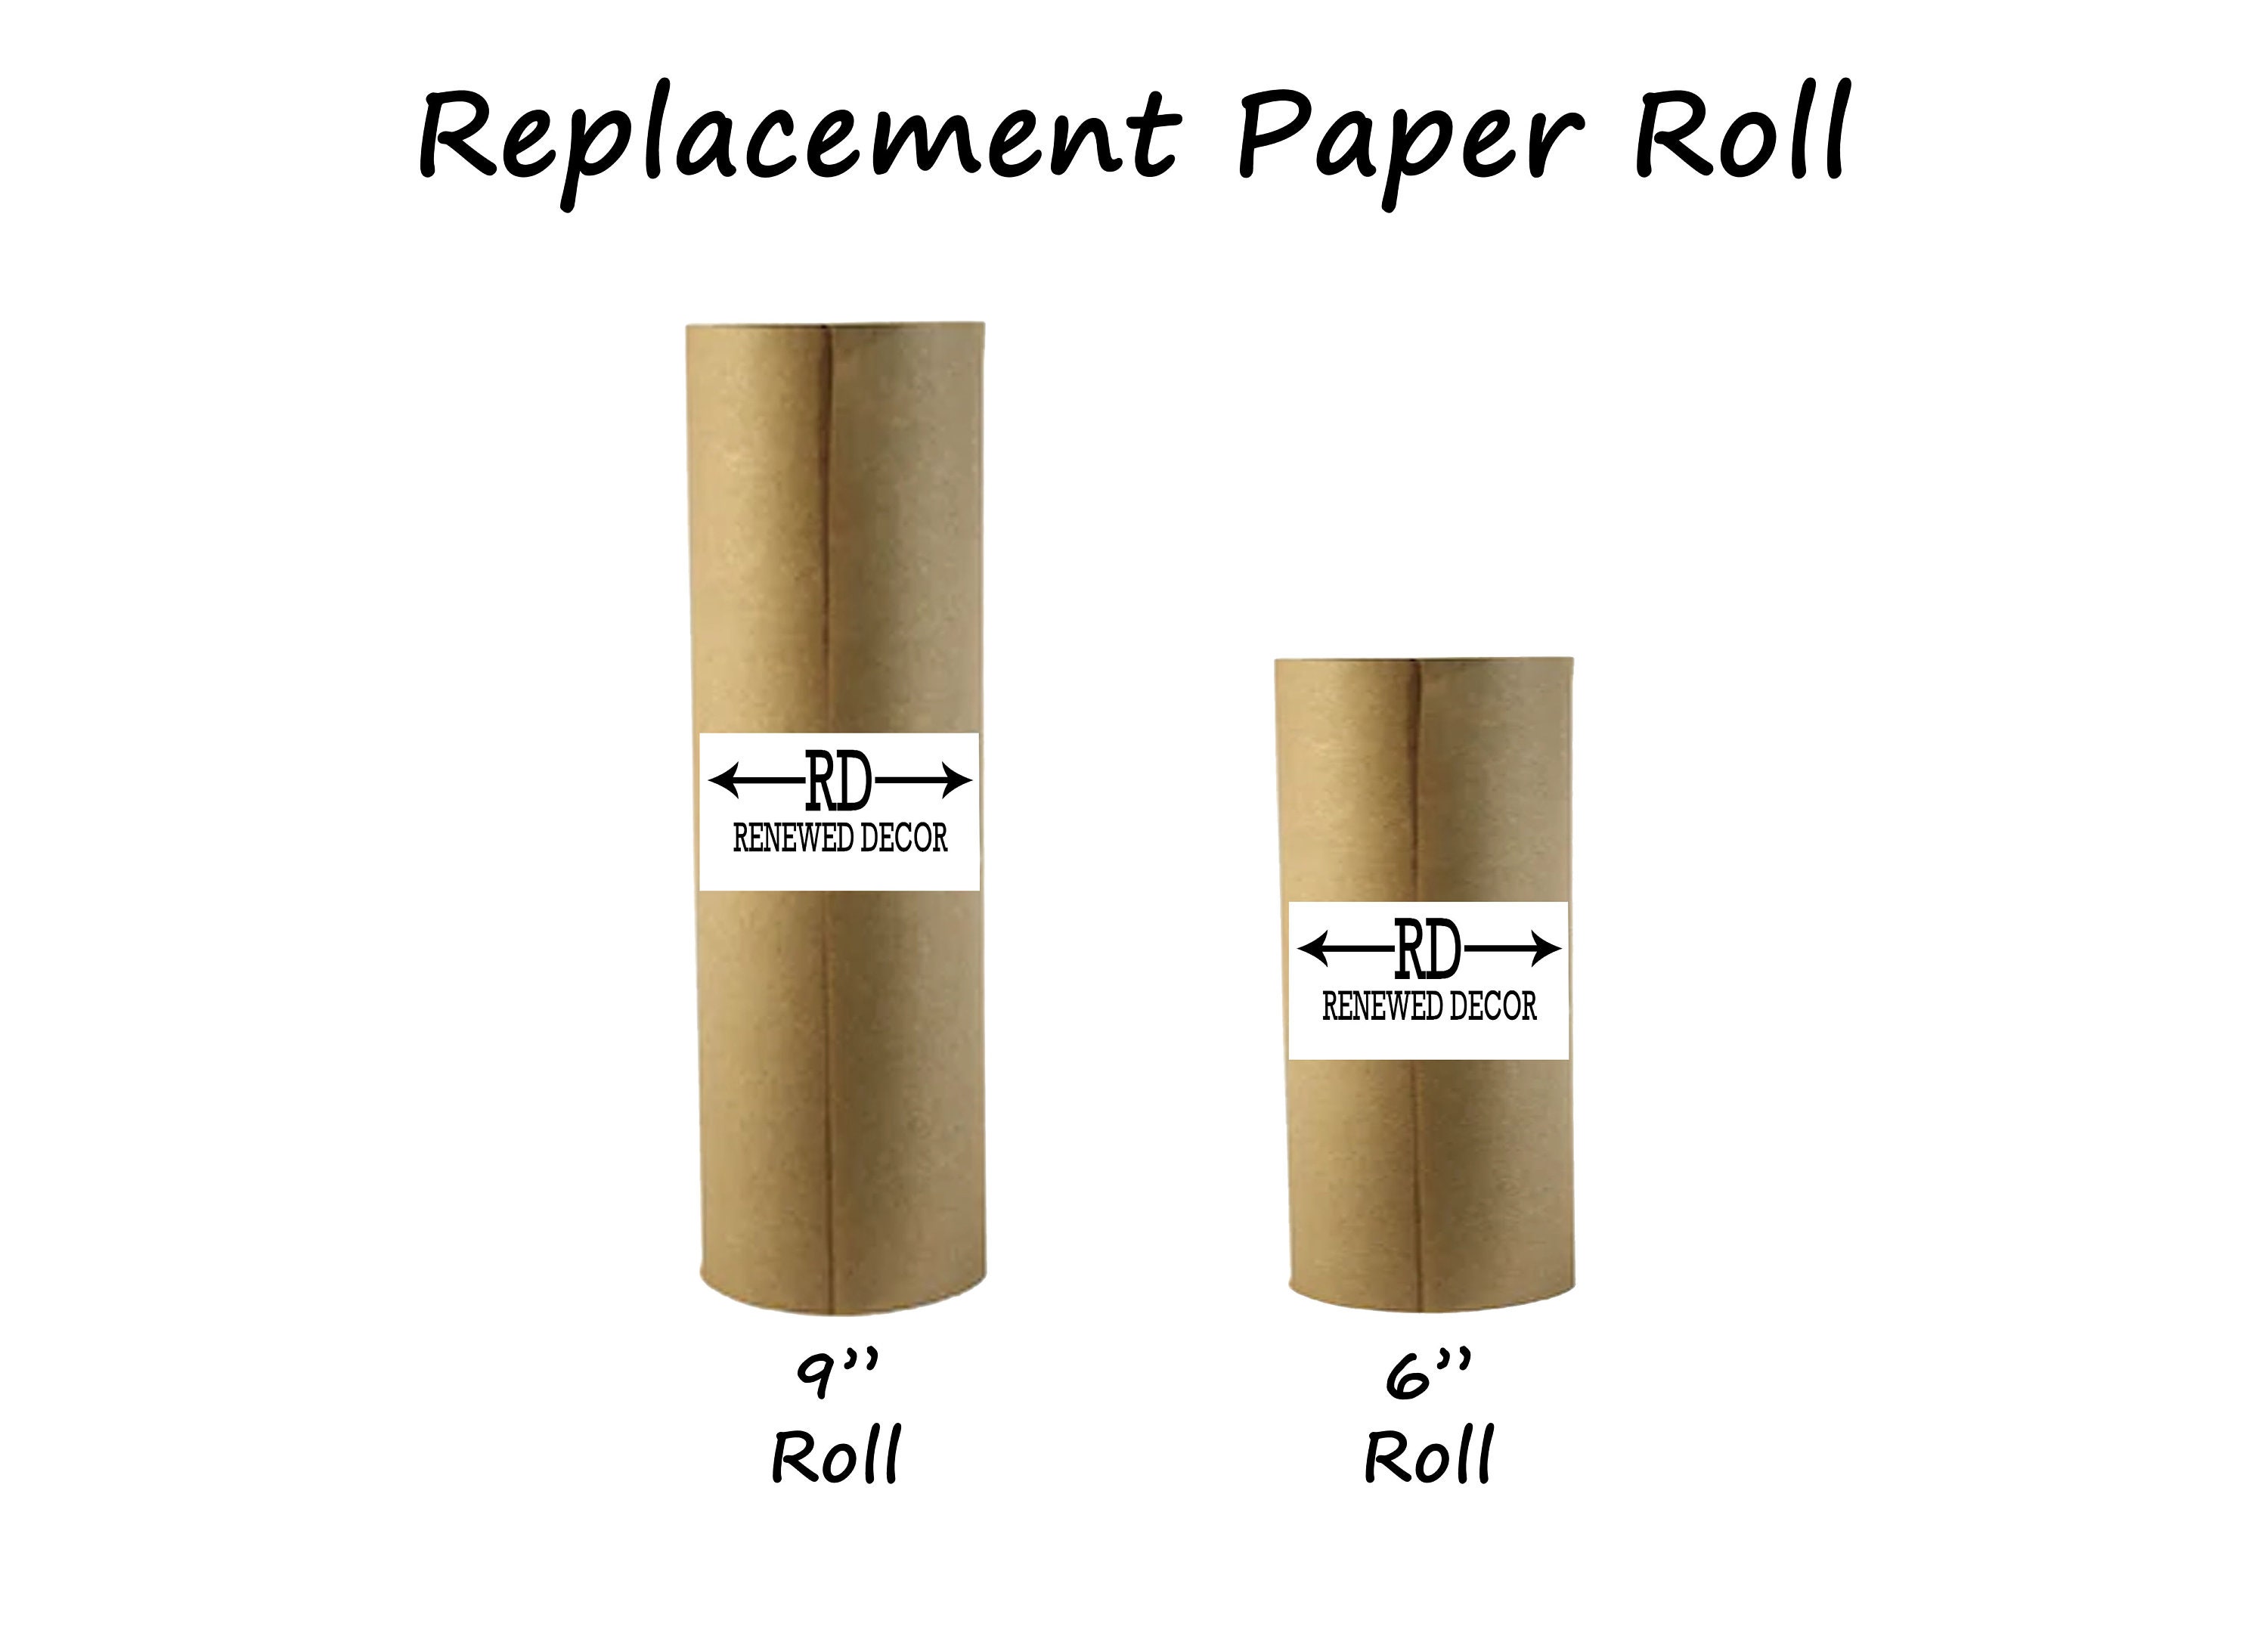 Kraft Paper Roll, Daily Kraft Paper Refills, Wrapping Paper Roll, Recycled  Paper, Eco Friendly, Daily Roller Kraft, Brown Butcher Paper Roll 